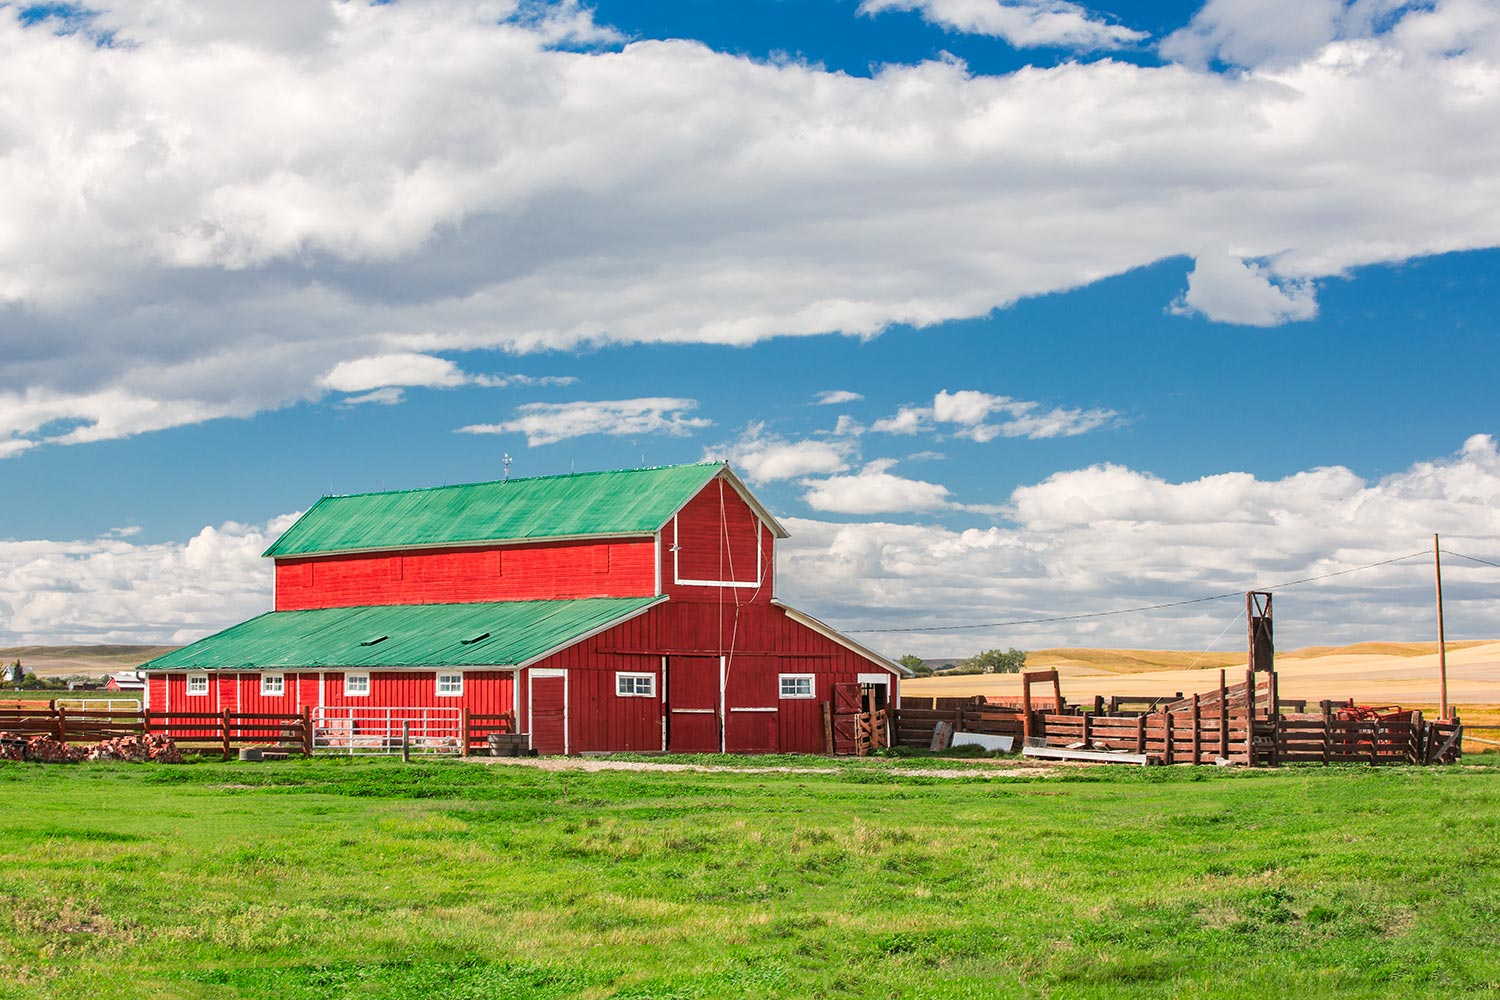 A beautiful red barn on a sunny summer day outside of Denton, Montana.&nbsp;→ Buy a Print&nbsp;or License Photo